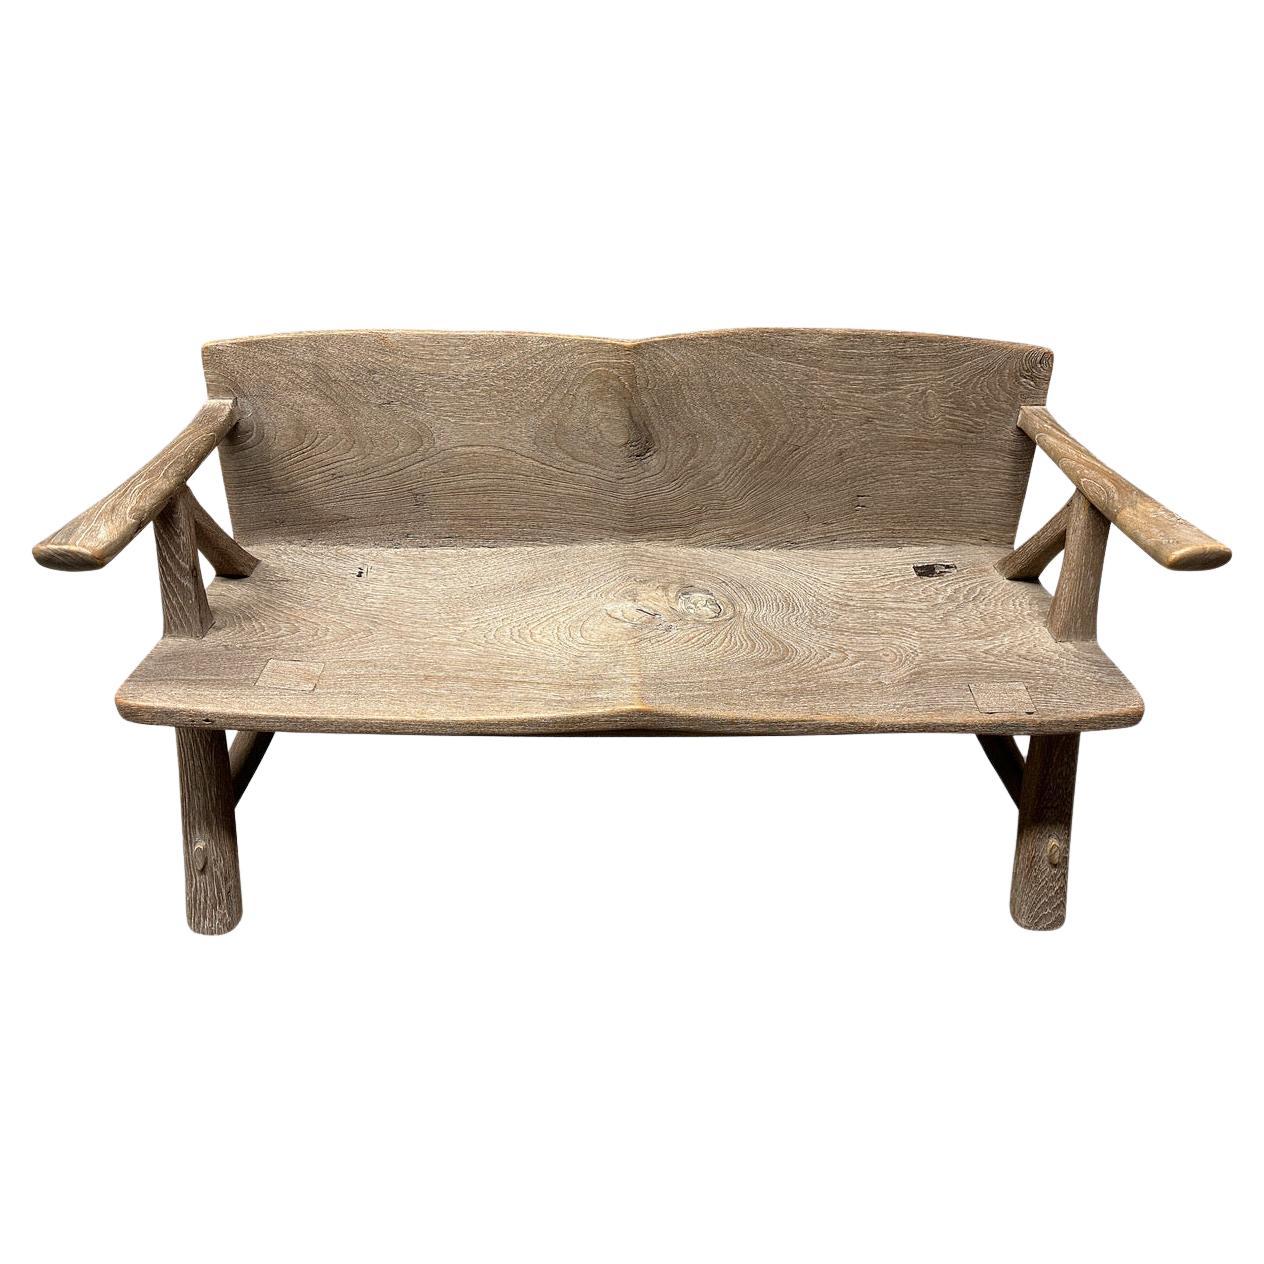 Andrianna Shamaris Mid Century Couture Teak Wood Bench For Sale